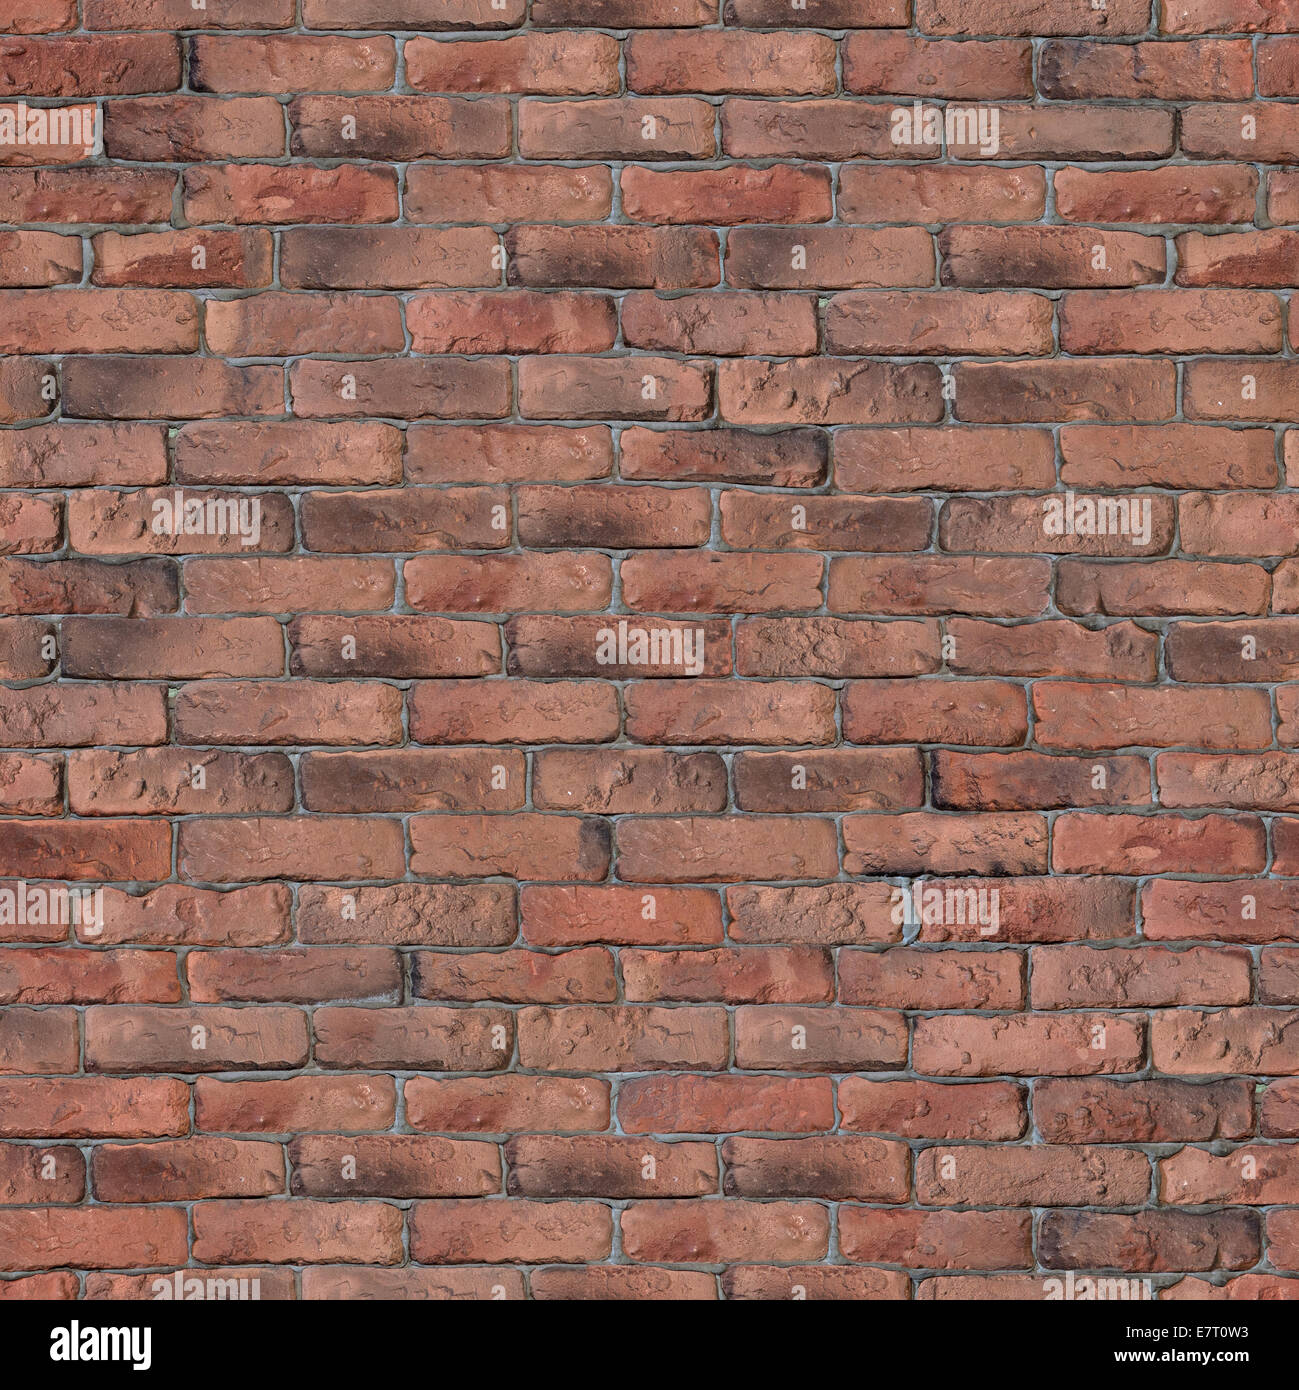 Old Red Brick Wall Texture. Stock Photo